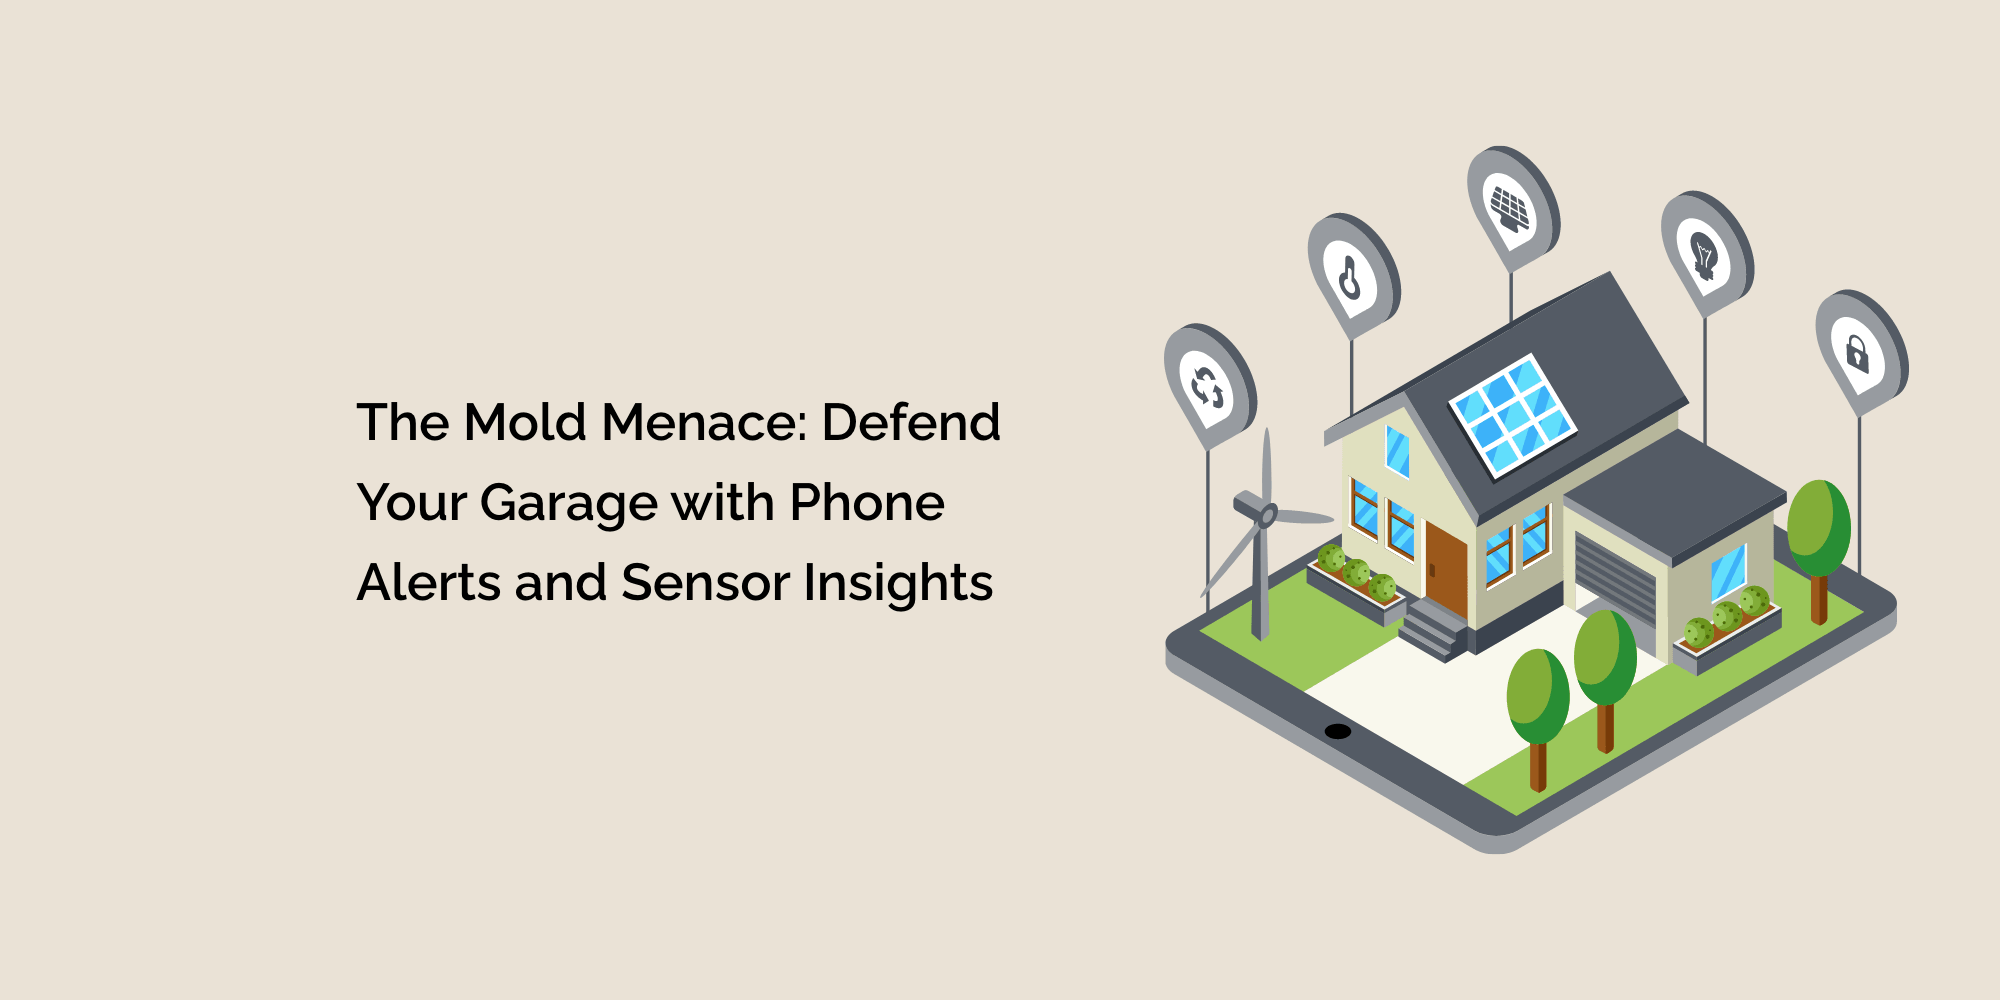 The Mold Menace: Defend Your Garage with Phone Alerts and Sensor Insights